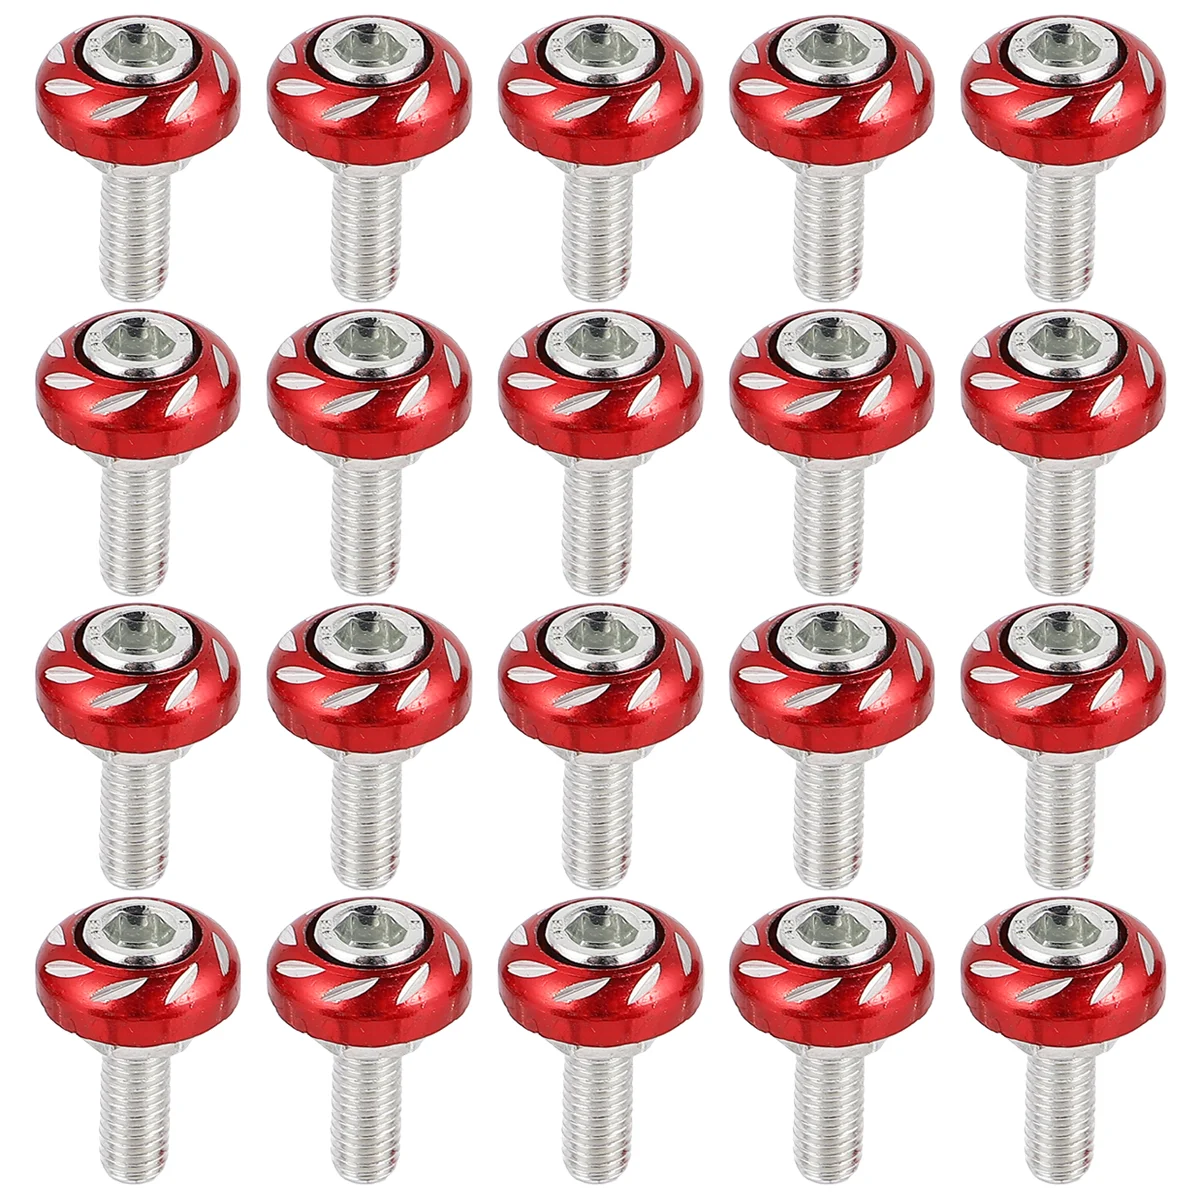 

20 Pcs Motorcycle Electric Vehicle Moped Decorative Screws Electrocar License Plate Motorbike Fasteners for Aluminum Alloy